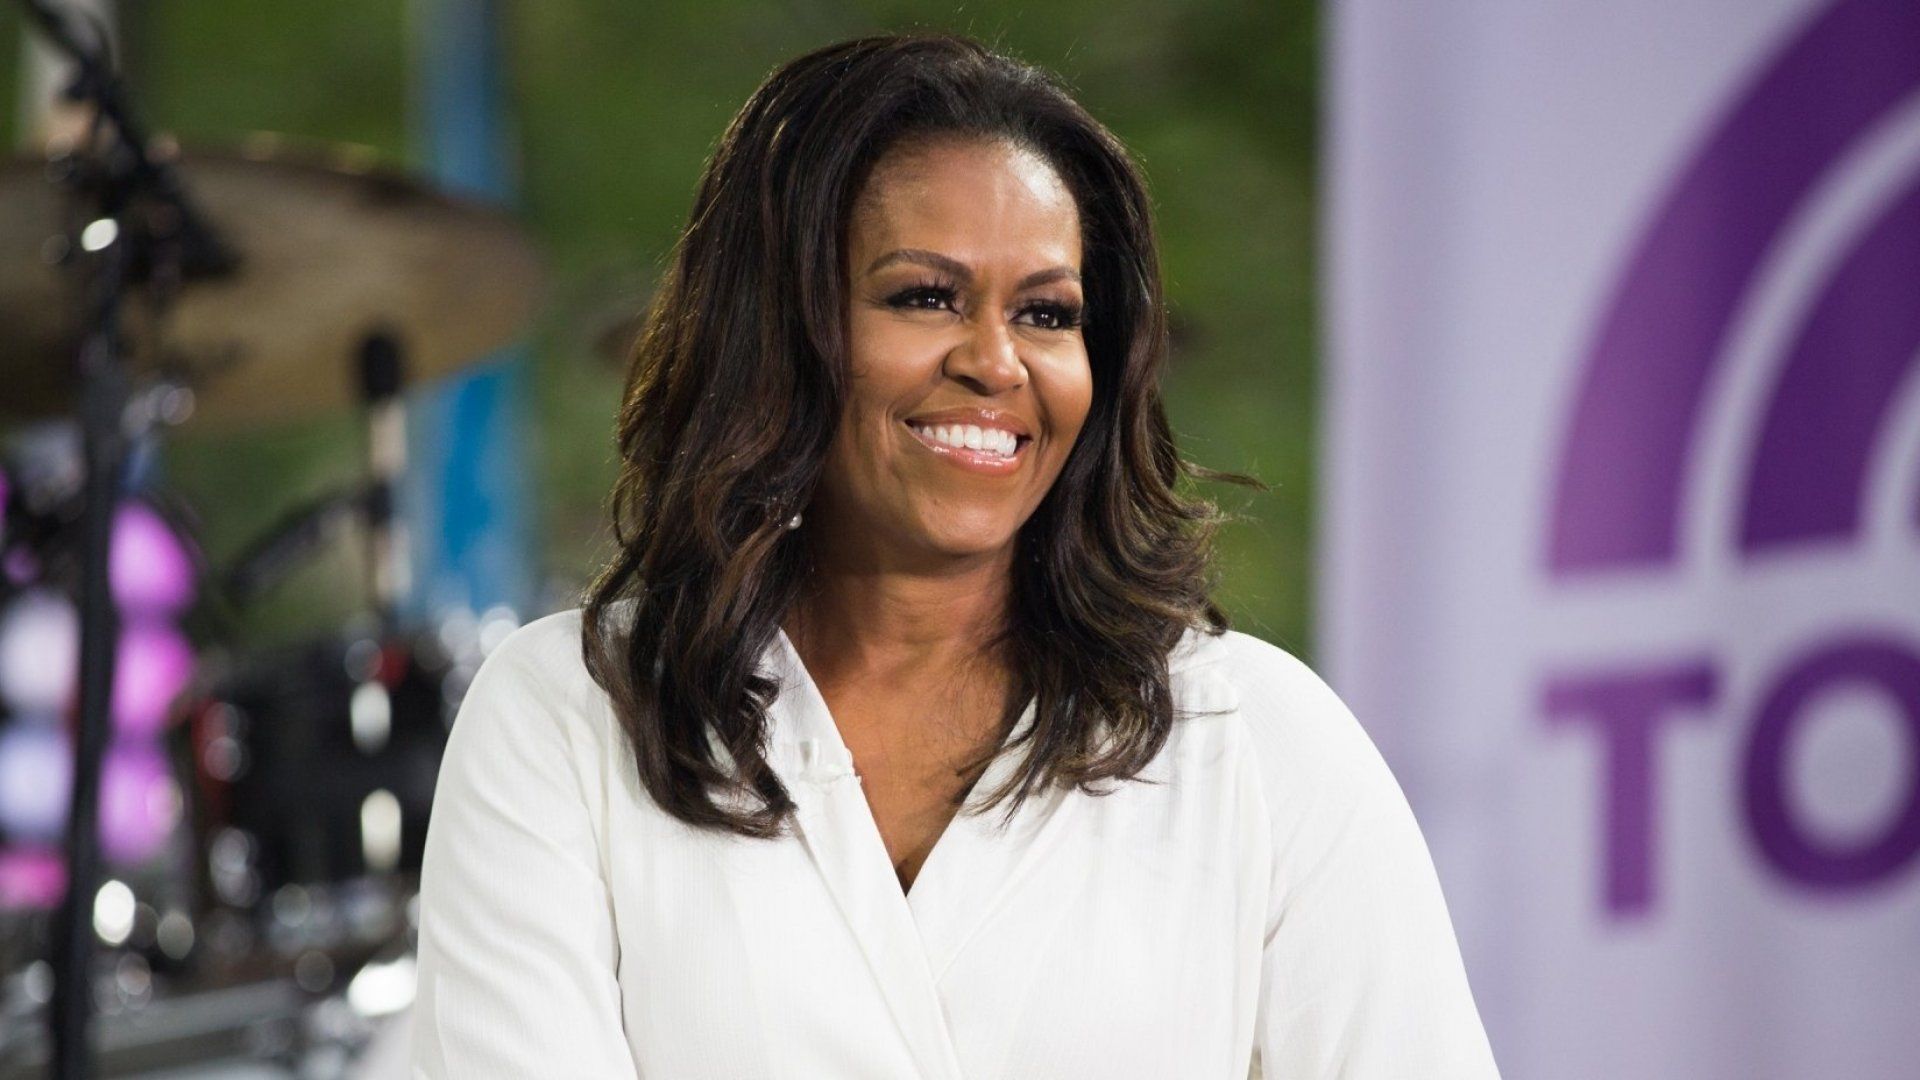 Michelle Obama's Memoir Perfectly Illustrates the 3 Life Stages